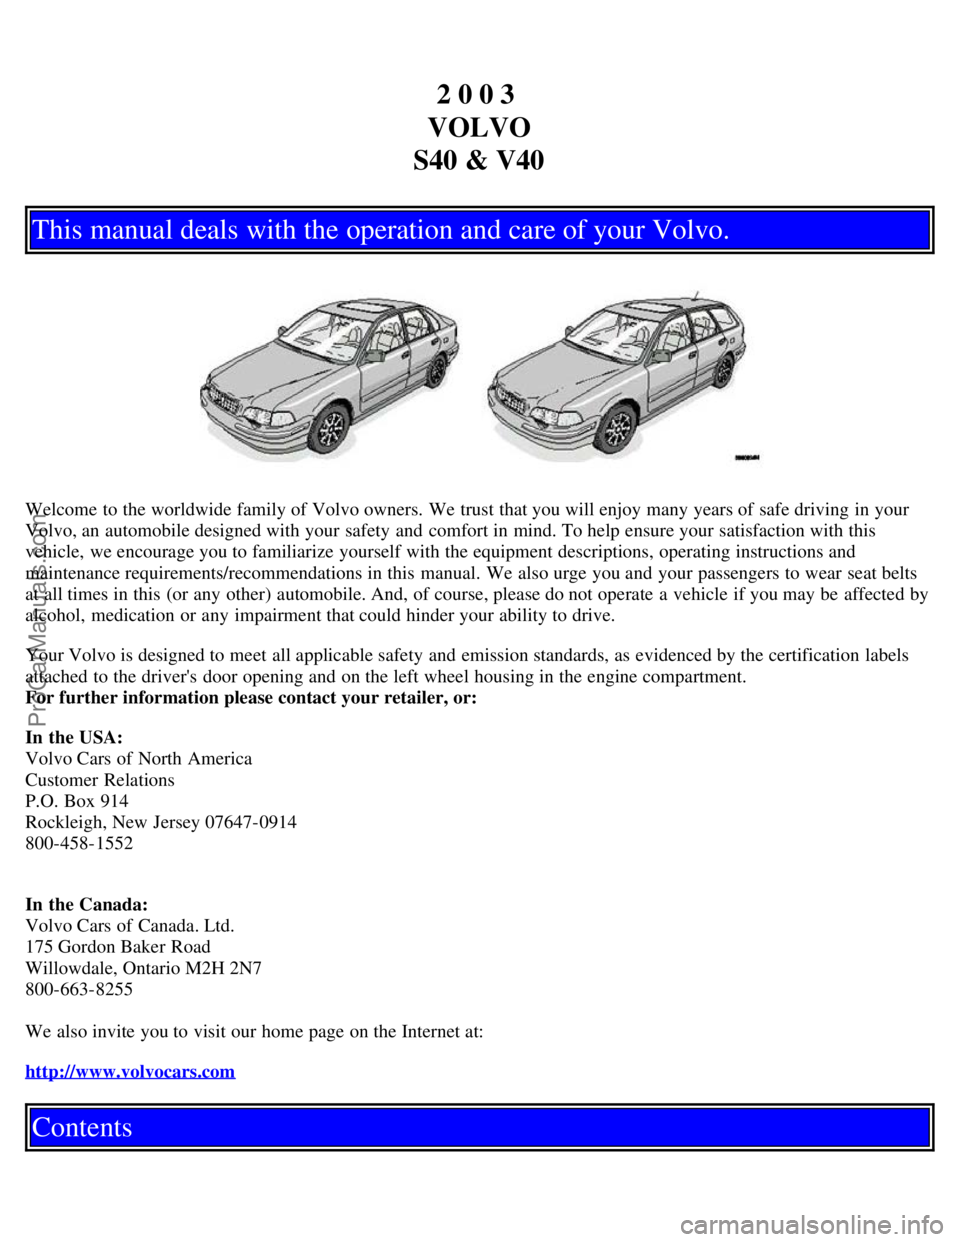 VOLVO V4 2003  Owners Manual 2 0 0 3 
VOLVO
S40 & V40
This manual deals with the operation and care of your Volvo.
Welcome to the worldwide family of Volvo owners. We trust that you will enjoy many years of safe driving in your
V